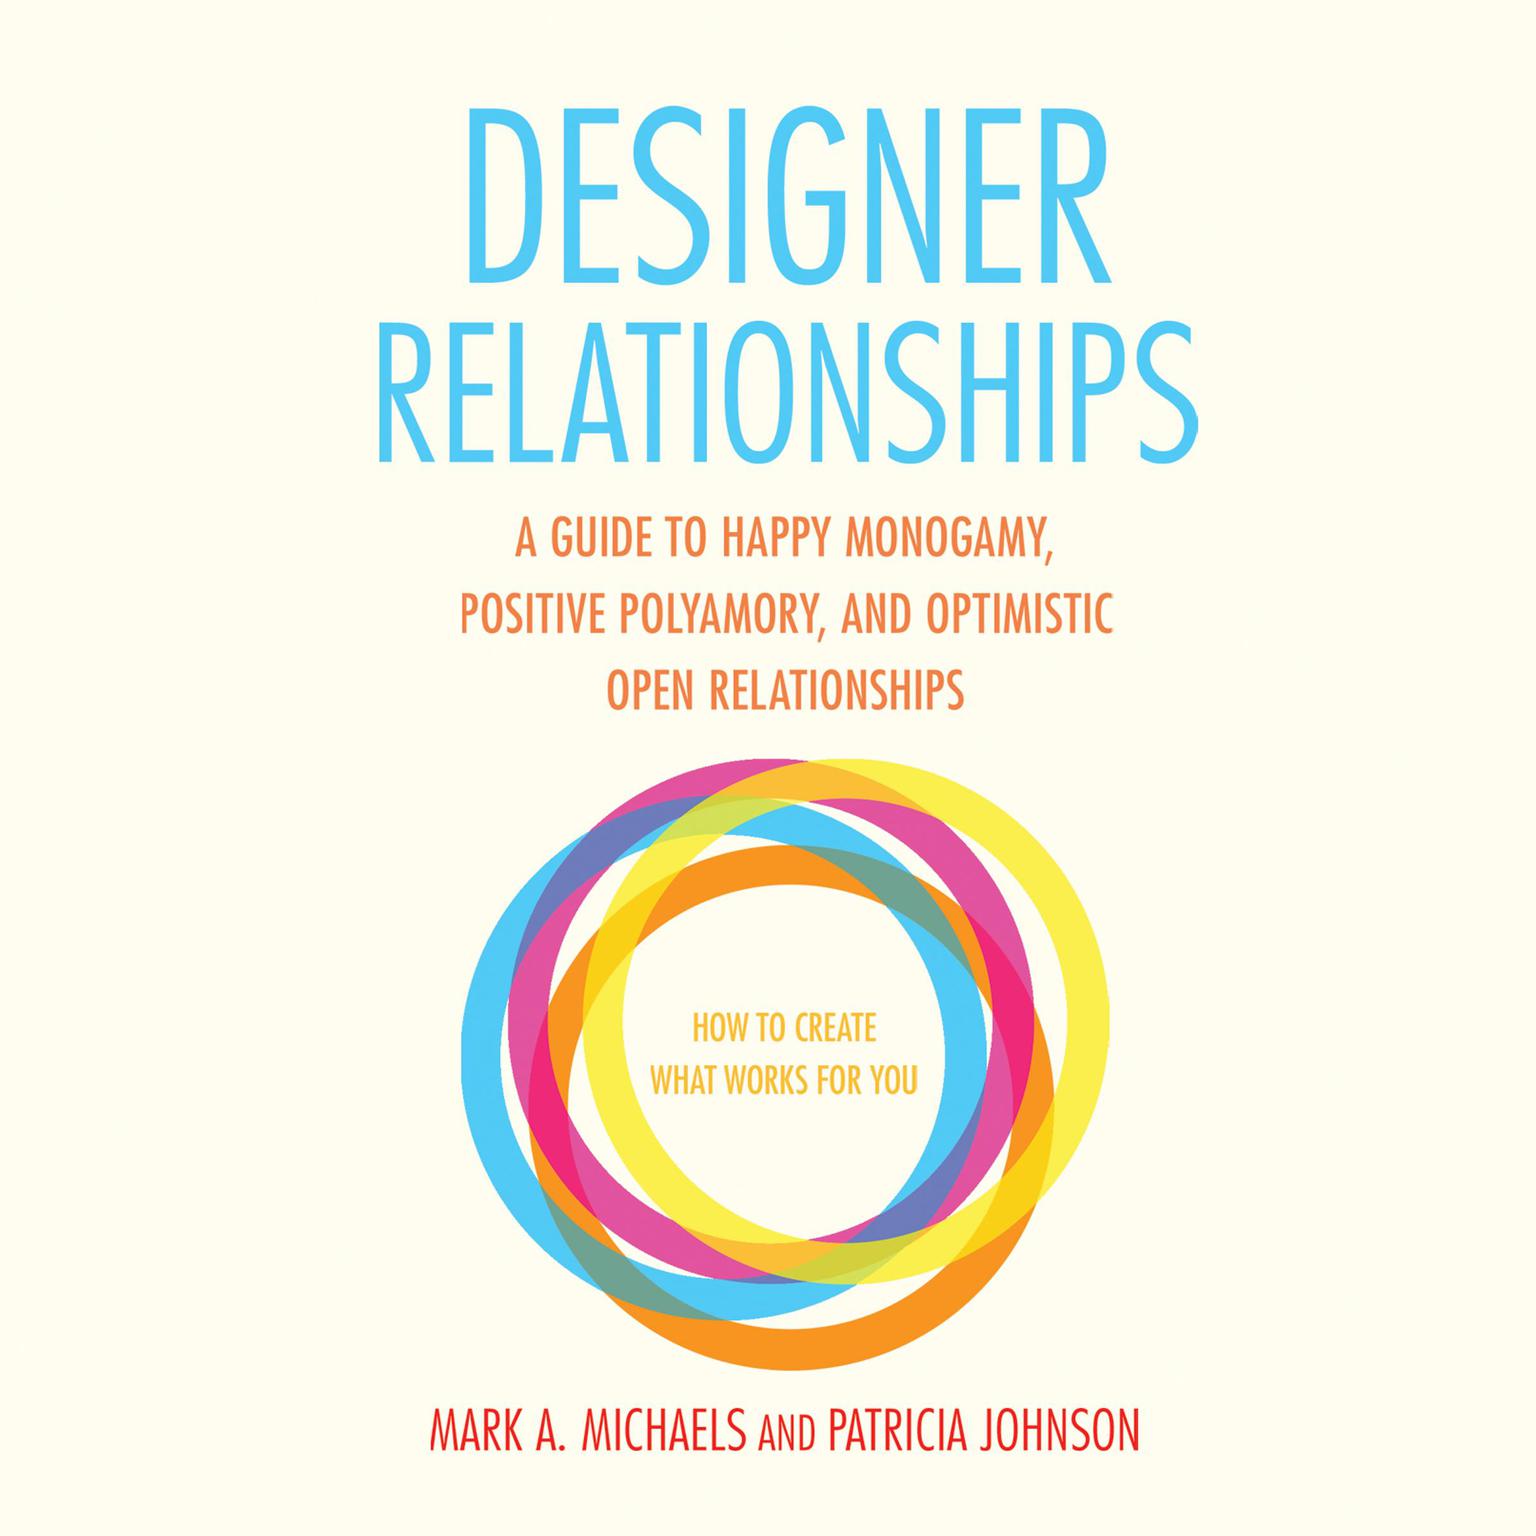 Designer Relationships: A Guide to Happy Monogamy, Positive Polyamory, and Optimistic Open Relationships Audiobook, by Mark A. Michaels